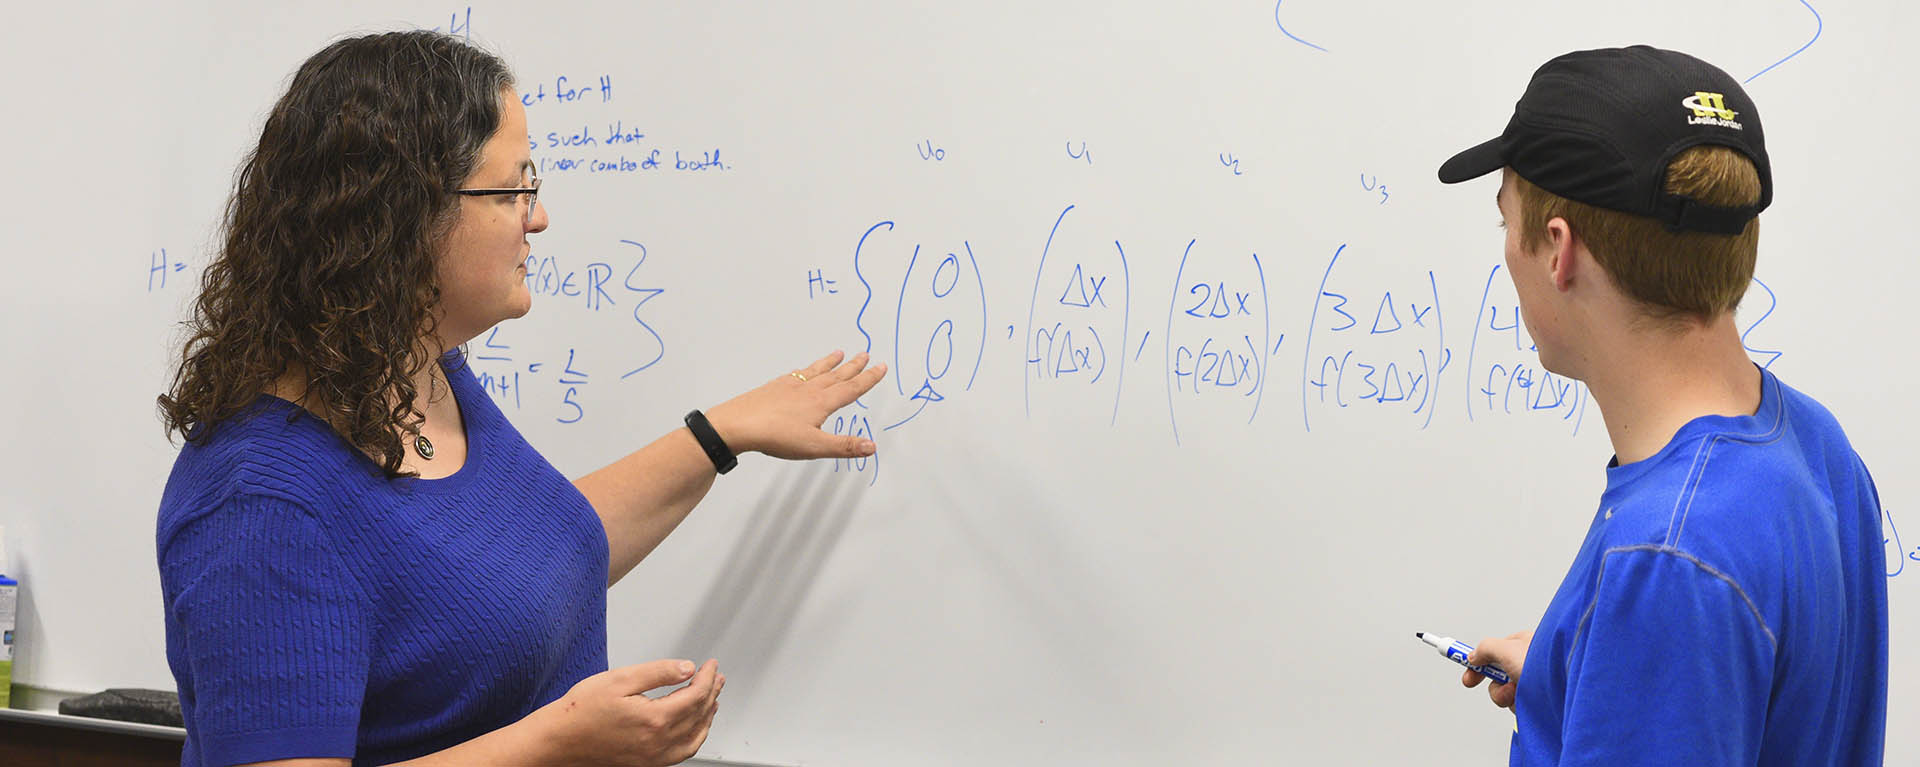 A math professor solves a problem with a student at the whiteboard.